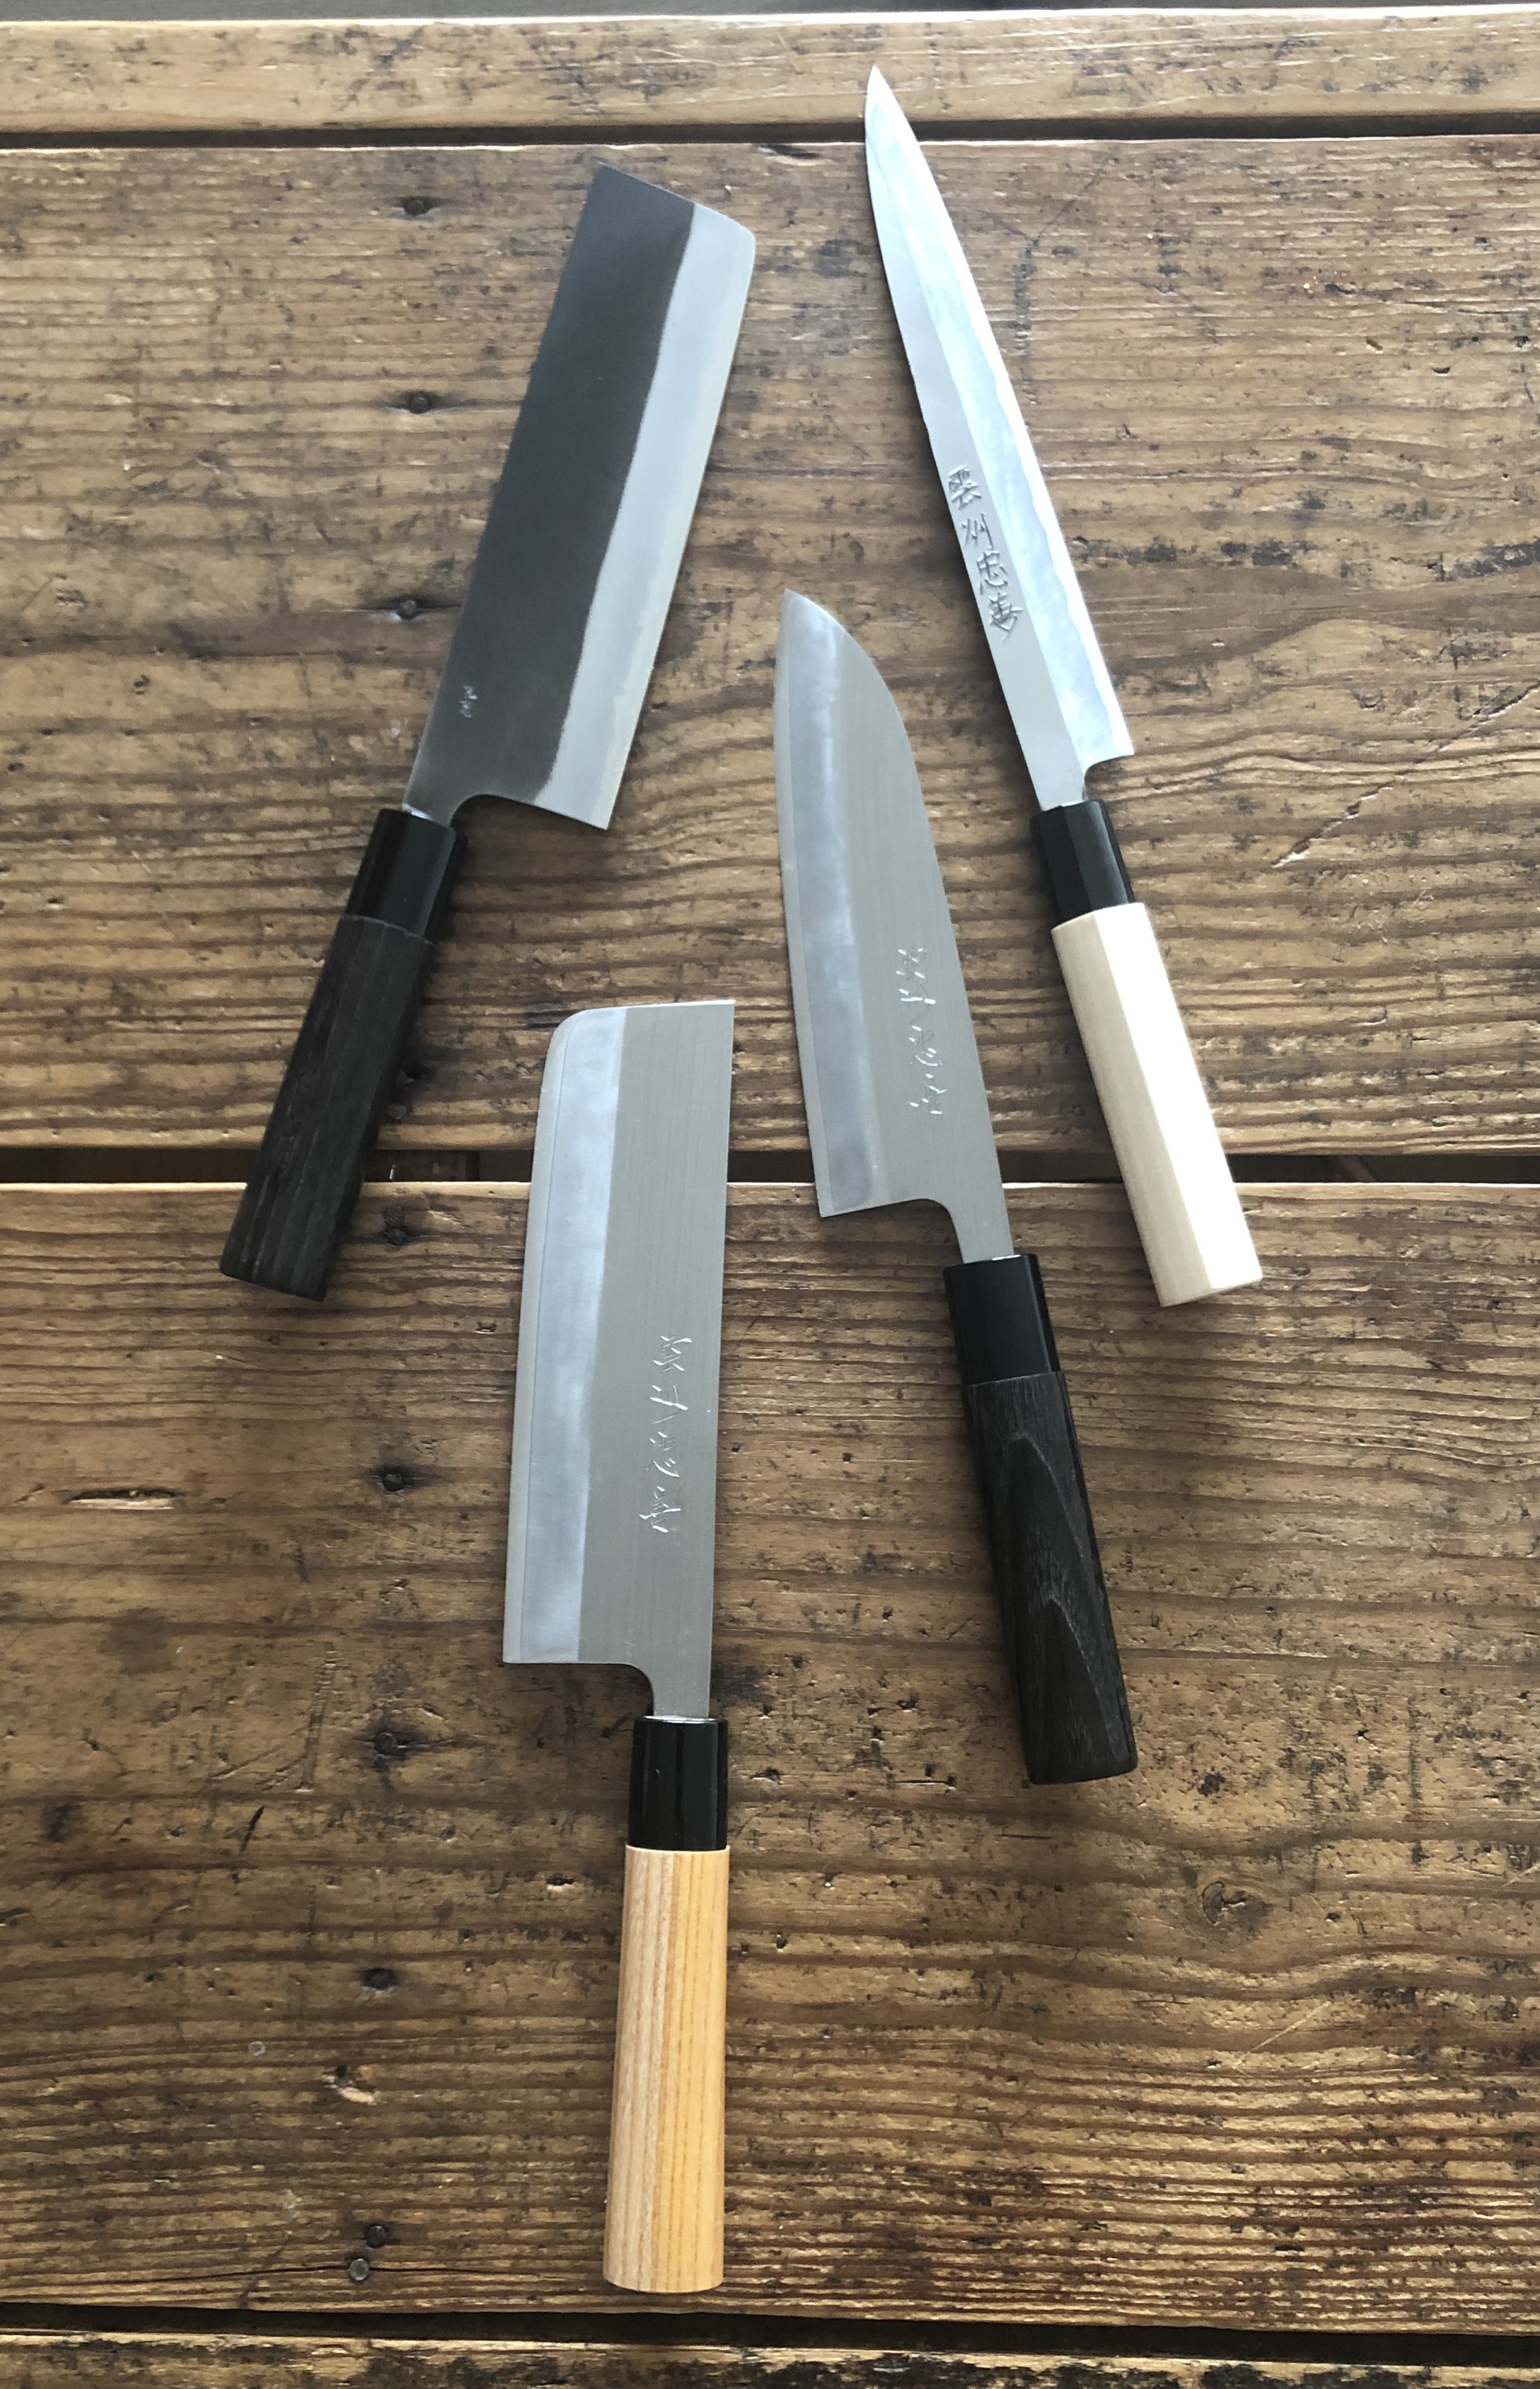 HIGH-QUALITY JAPANESE KNIVES: HOW TO CARE FOR YOUR KNIVES - The